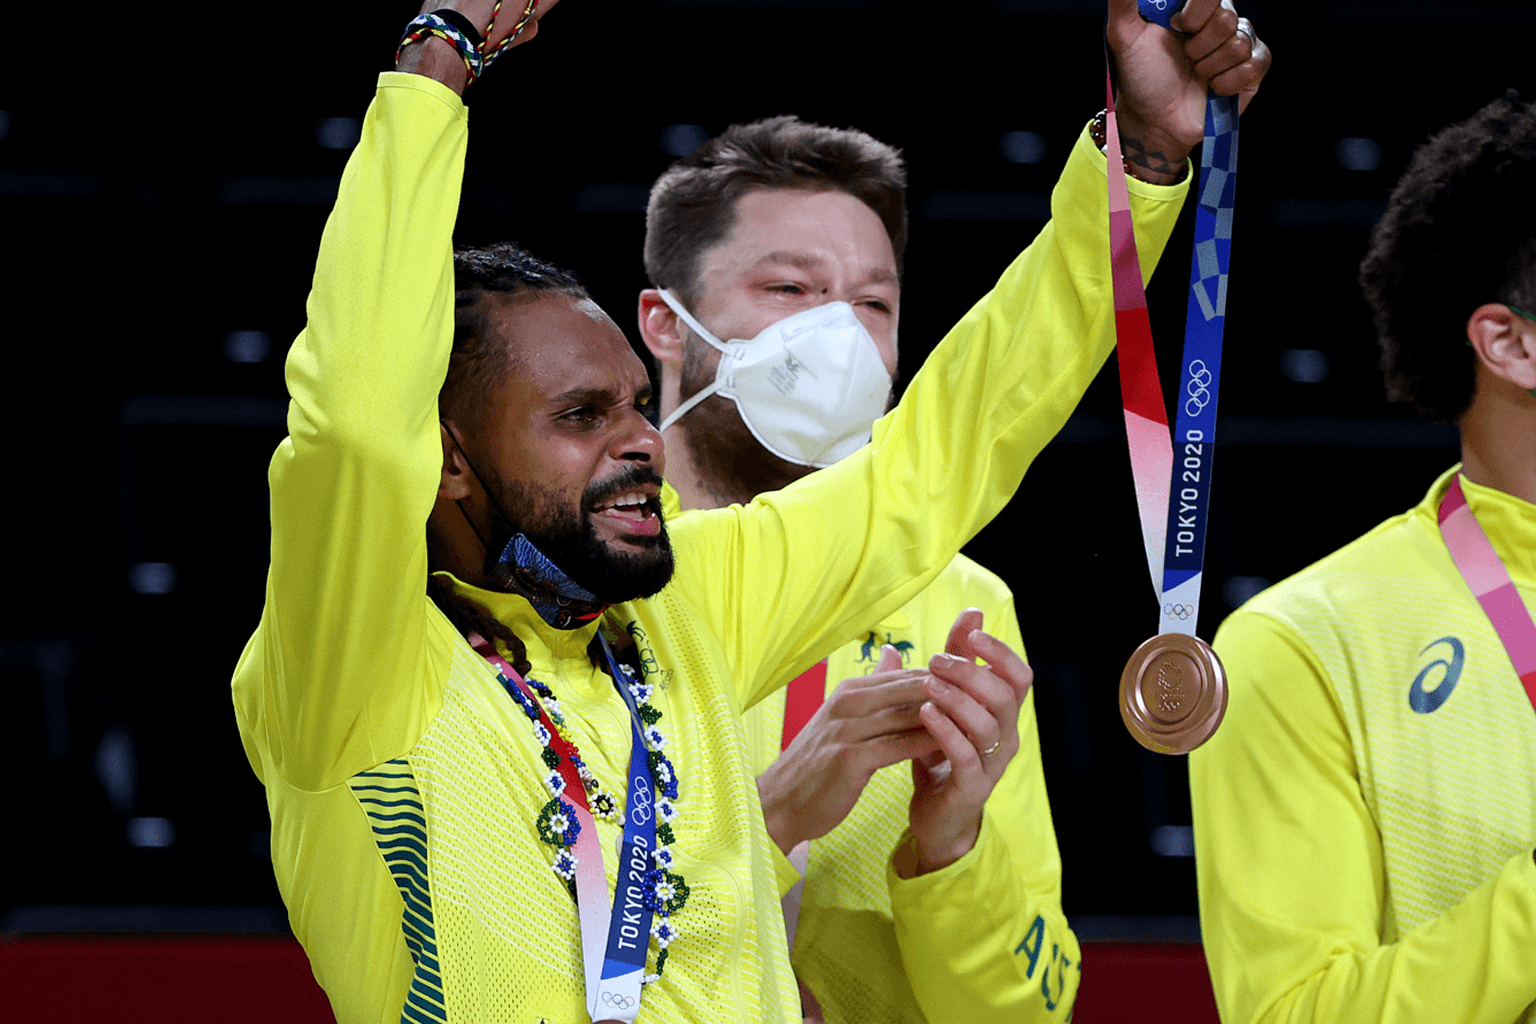 Australian Boomers basketball team captain Patrick Mills holds up an Tokyo 2020 Olympic Bronze Medal, with Matthew Dellavedova in the background.